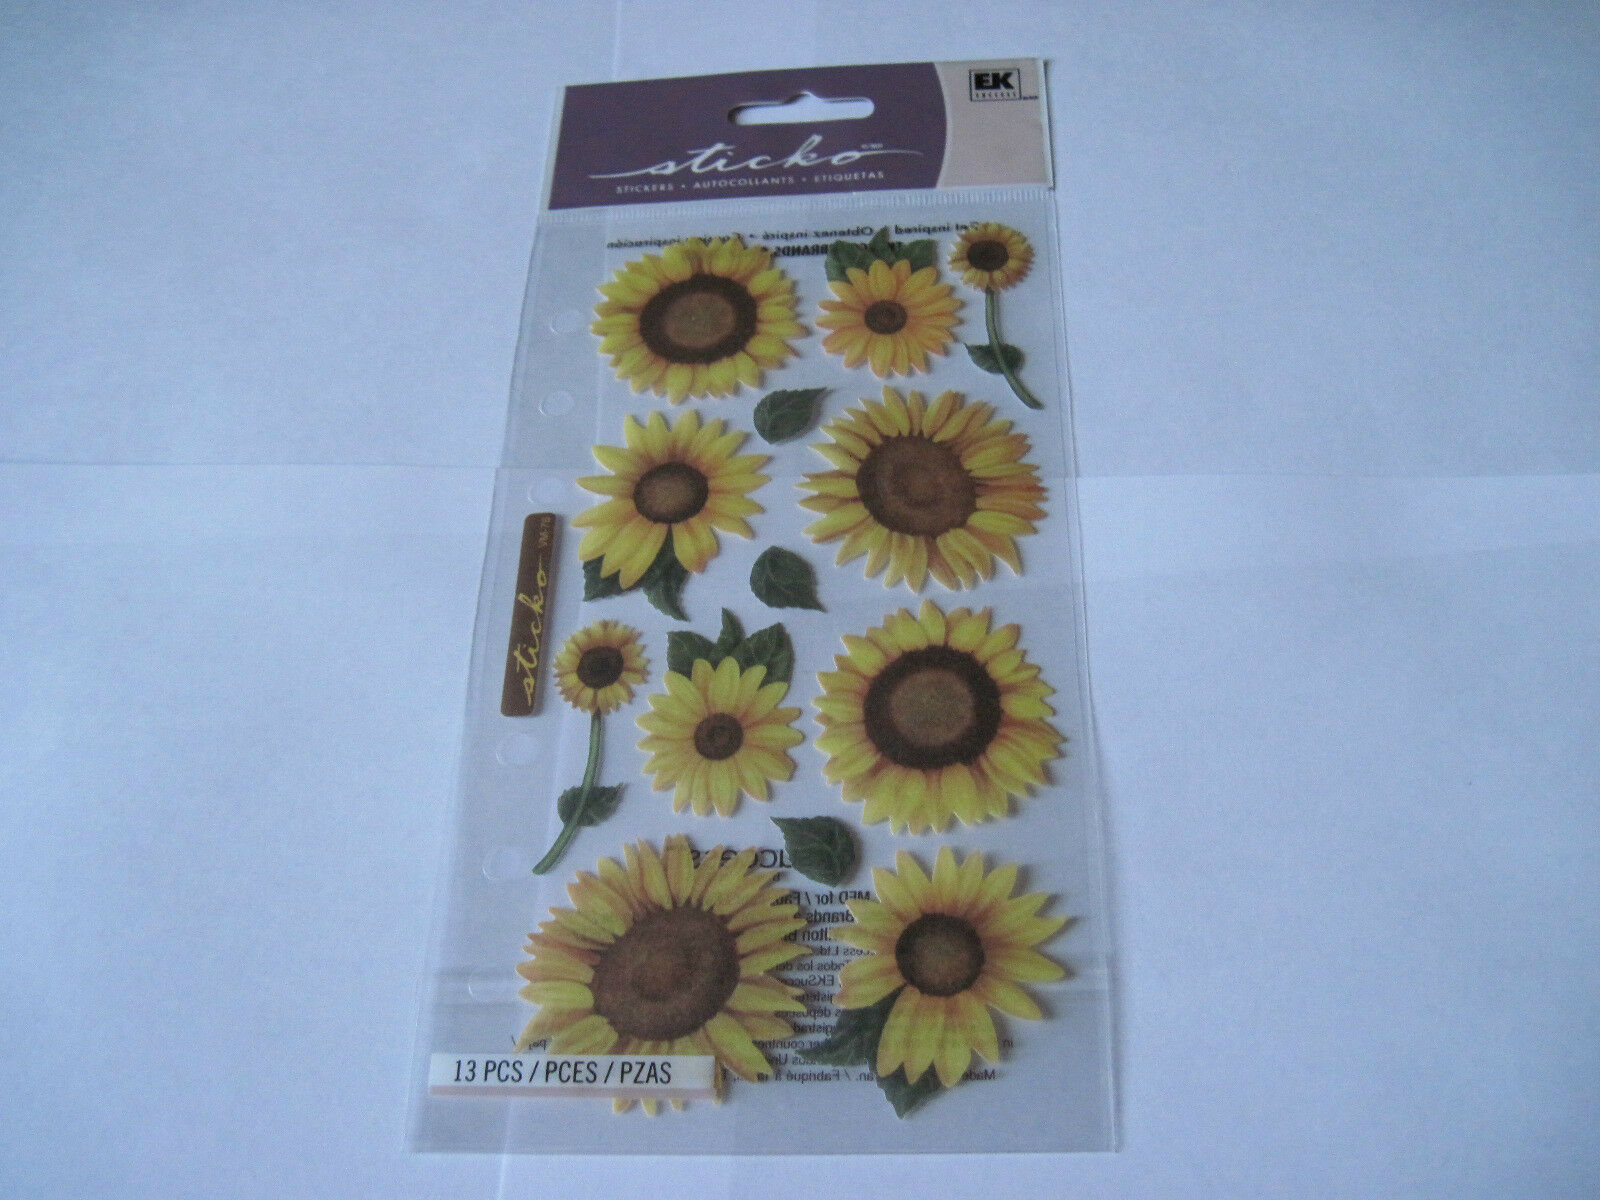 Scrapbooking Stickers Sticko Vellum Sunflowers Large Small Leaves Flowers Yellow